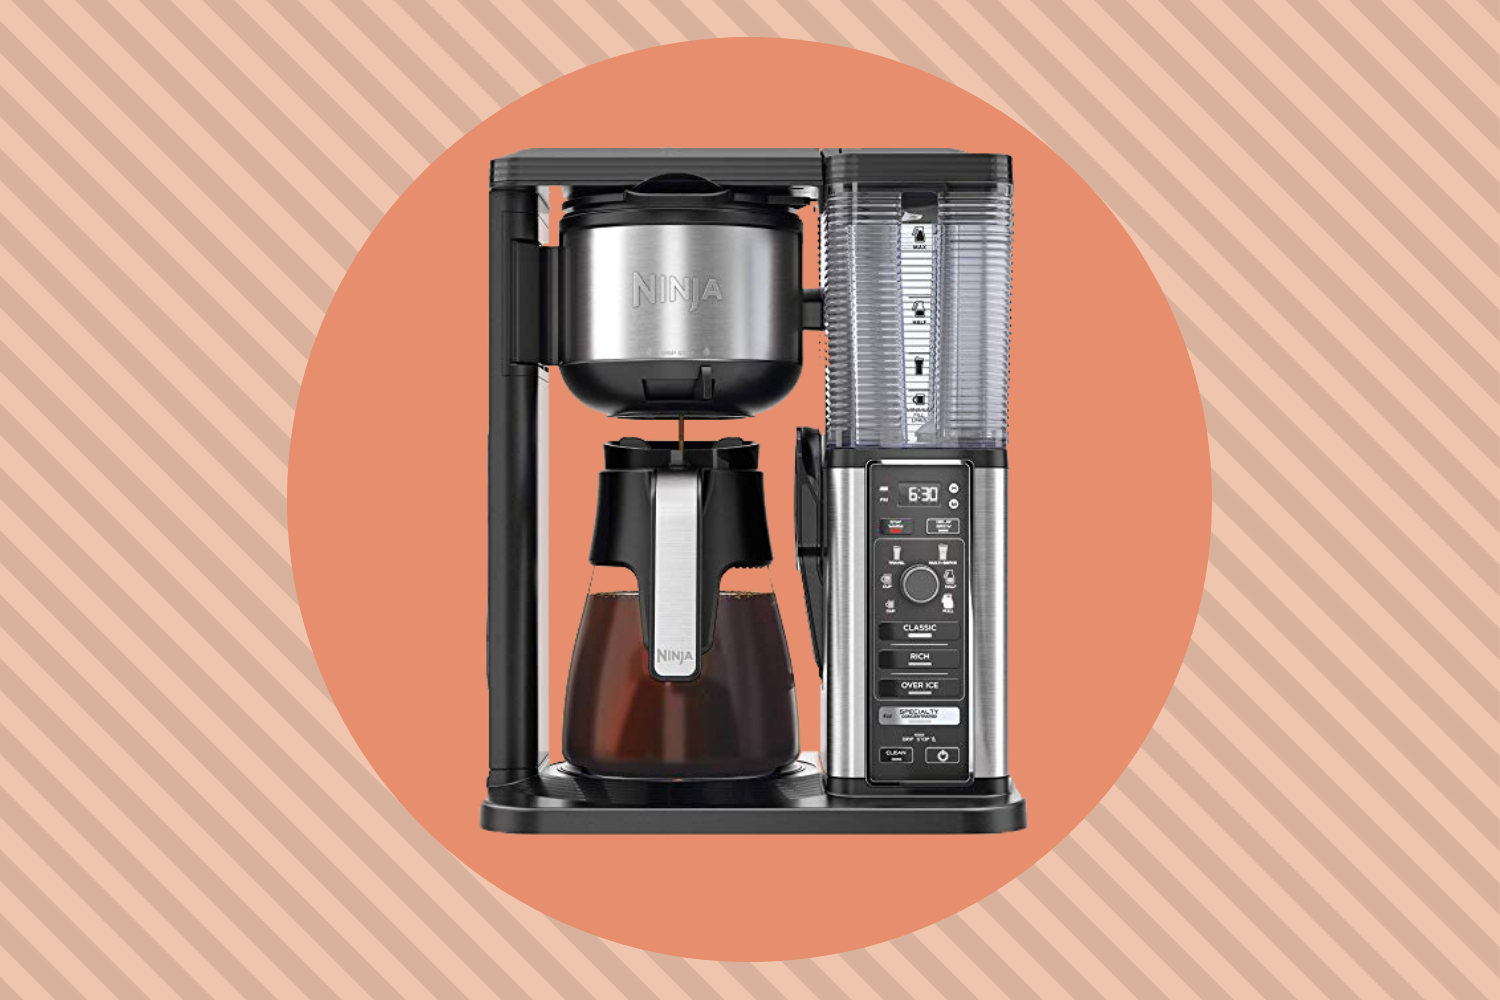 https://www.womansworld.com/wp-content/uploads/2019/09/top-rated-coffee-machine-ninja.png